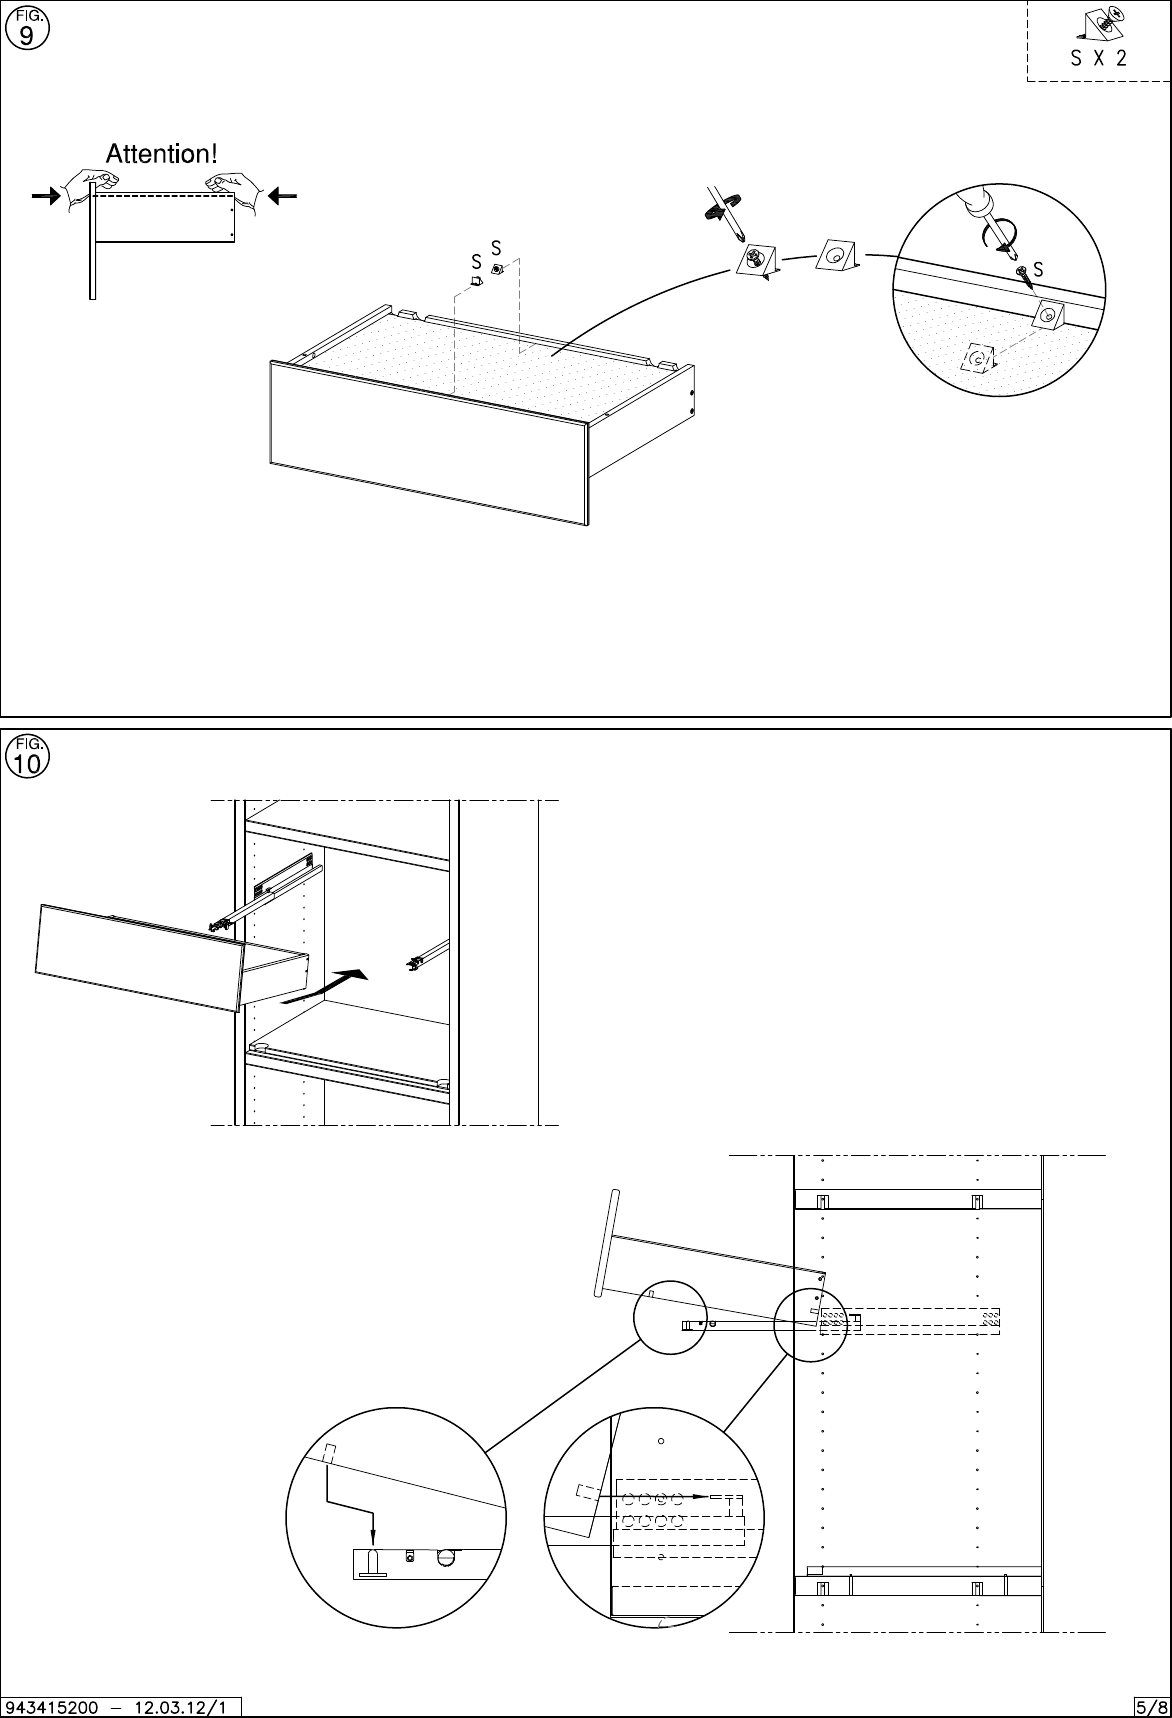 Page 5 of 8 - Boconcept Boconcept--5200-Assembly-Instruction B:\DK_PTA_Share\Inventor Ation\341 Lecco\Lecco 5200\Assembly Instruction\943415200_v1_10